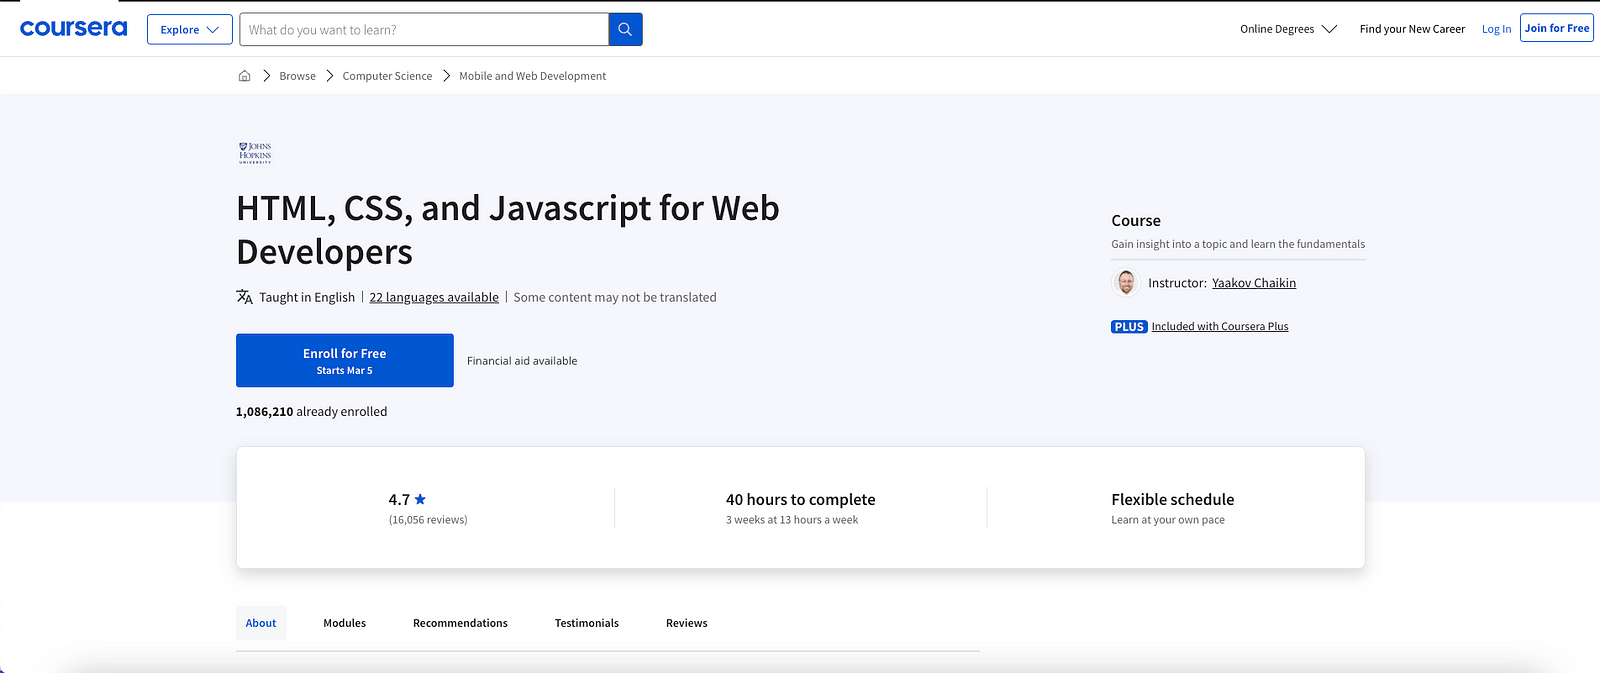 Coursera Course Page for HTML, CSS, and JavaScript for Web Developers